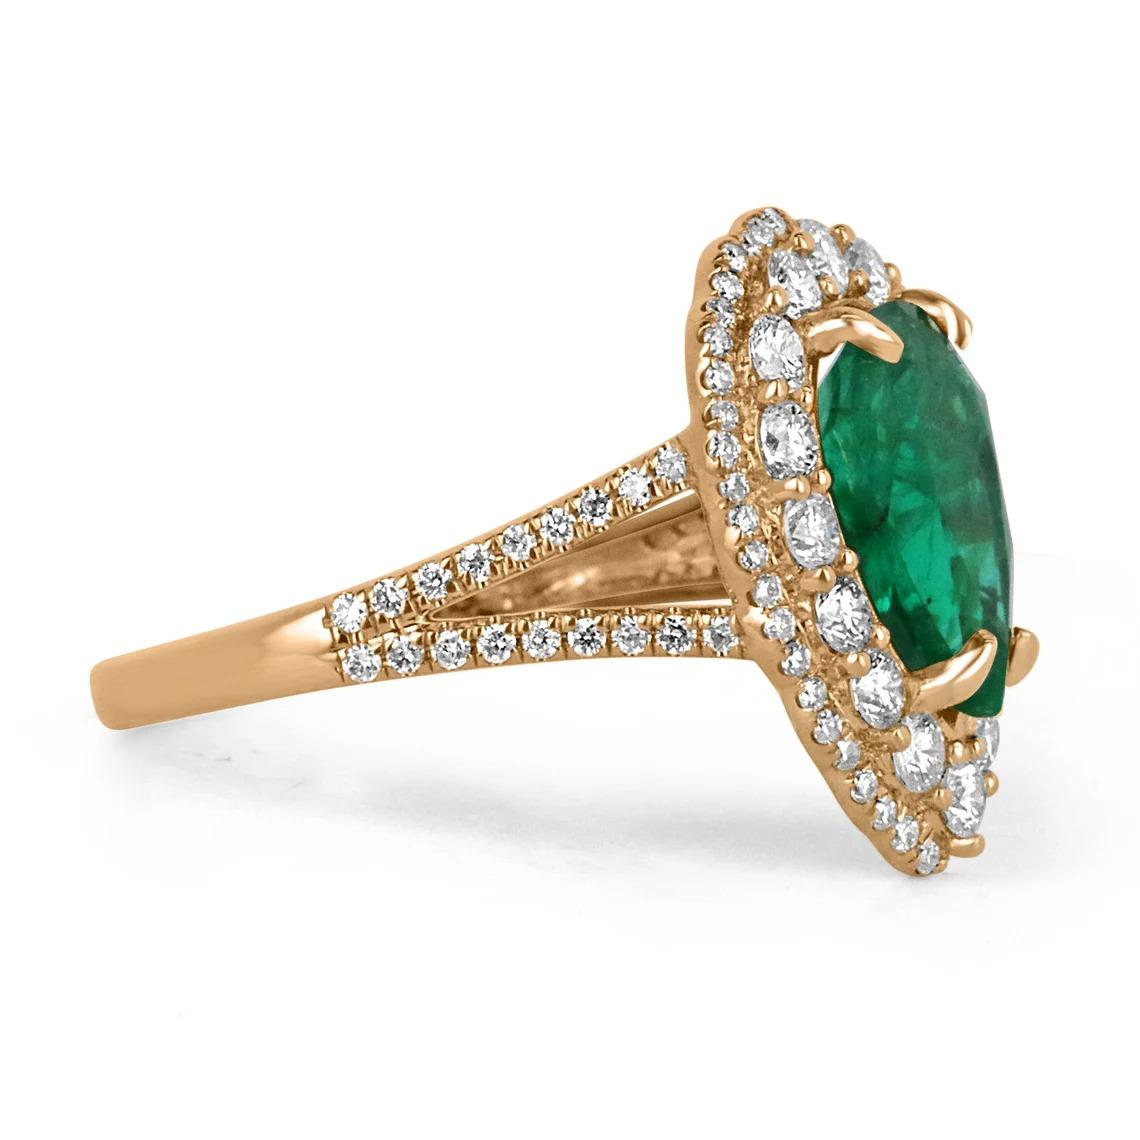 A showstopping emerald and diamond engagement/right-hand ring. This exquisite piece features a natural fine-quality emerald, cut into the shape of a pear and showcases a deep, rich dark green color with remarkable clarity and luster. Accenting